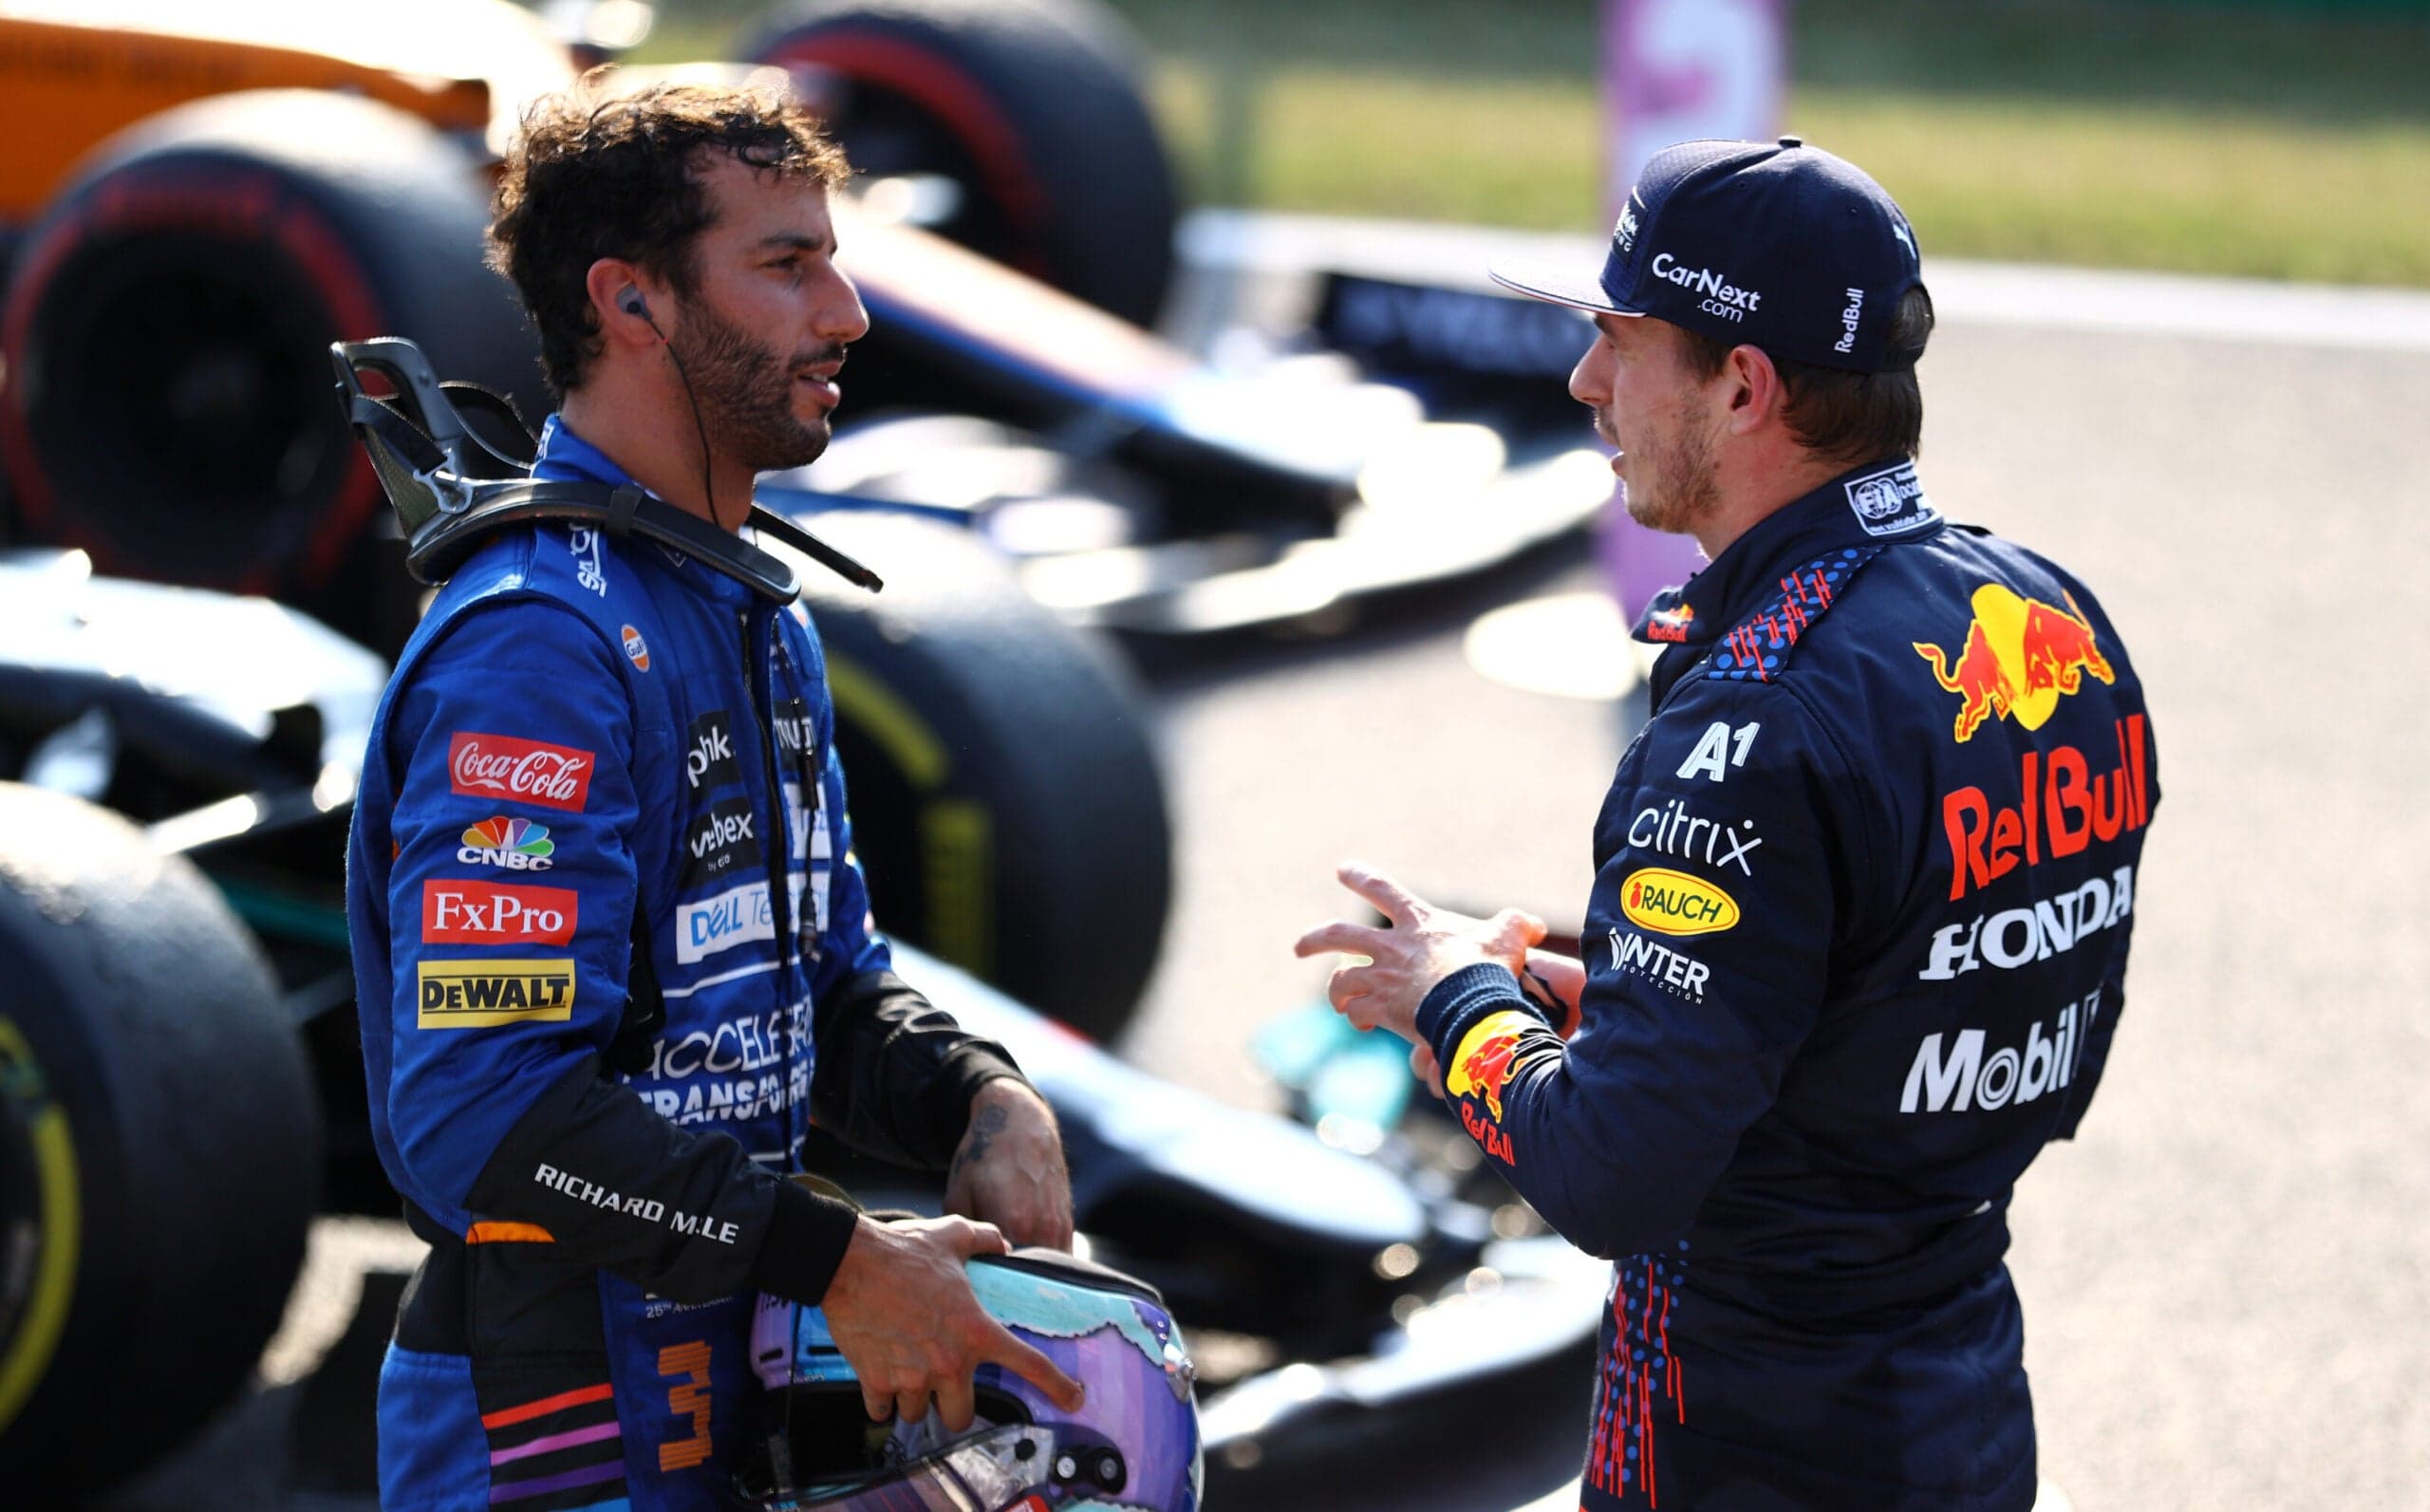 Daniel Ricciardo speaking to Max Verstappen after taking his and McLaren's first win in a long time in Monza